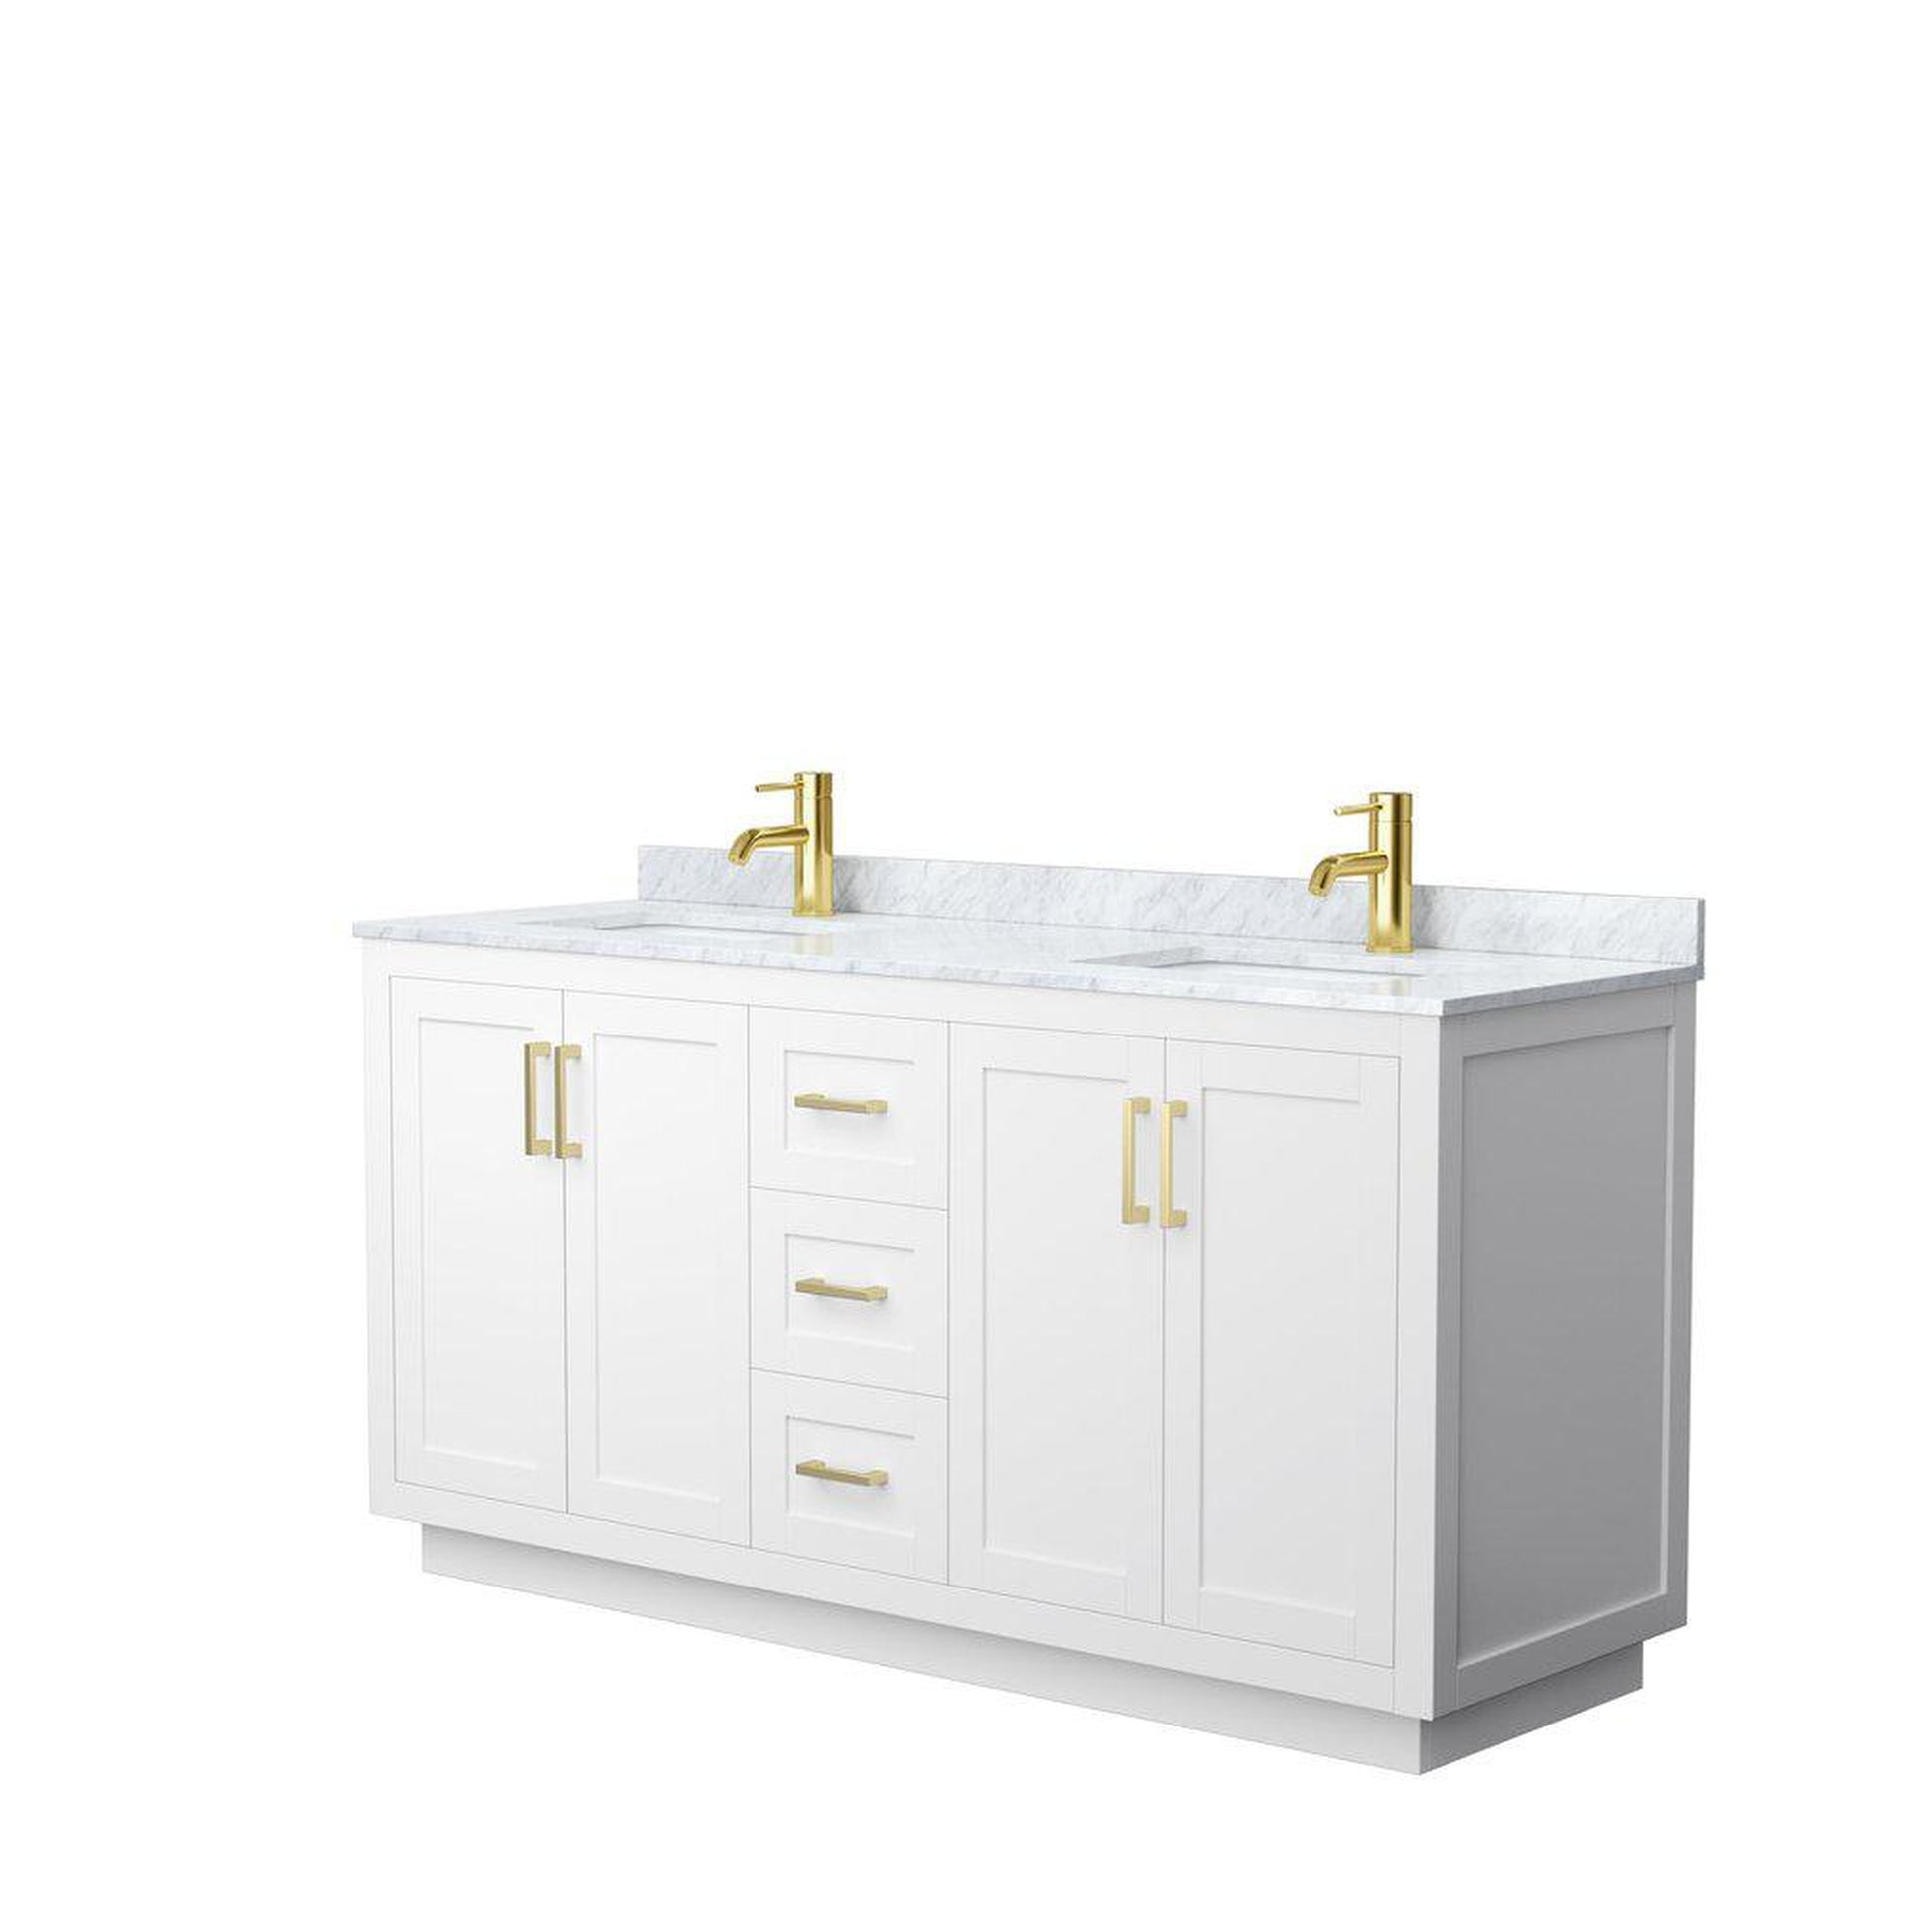 Wyndham Collection Miranda 66" Double Bathroom White Vanity Set With White Carrara Marble Countertop, Undermount Square Sink, And Brushed Gold Trim